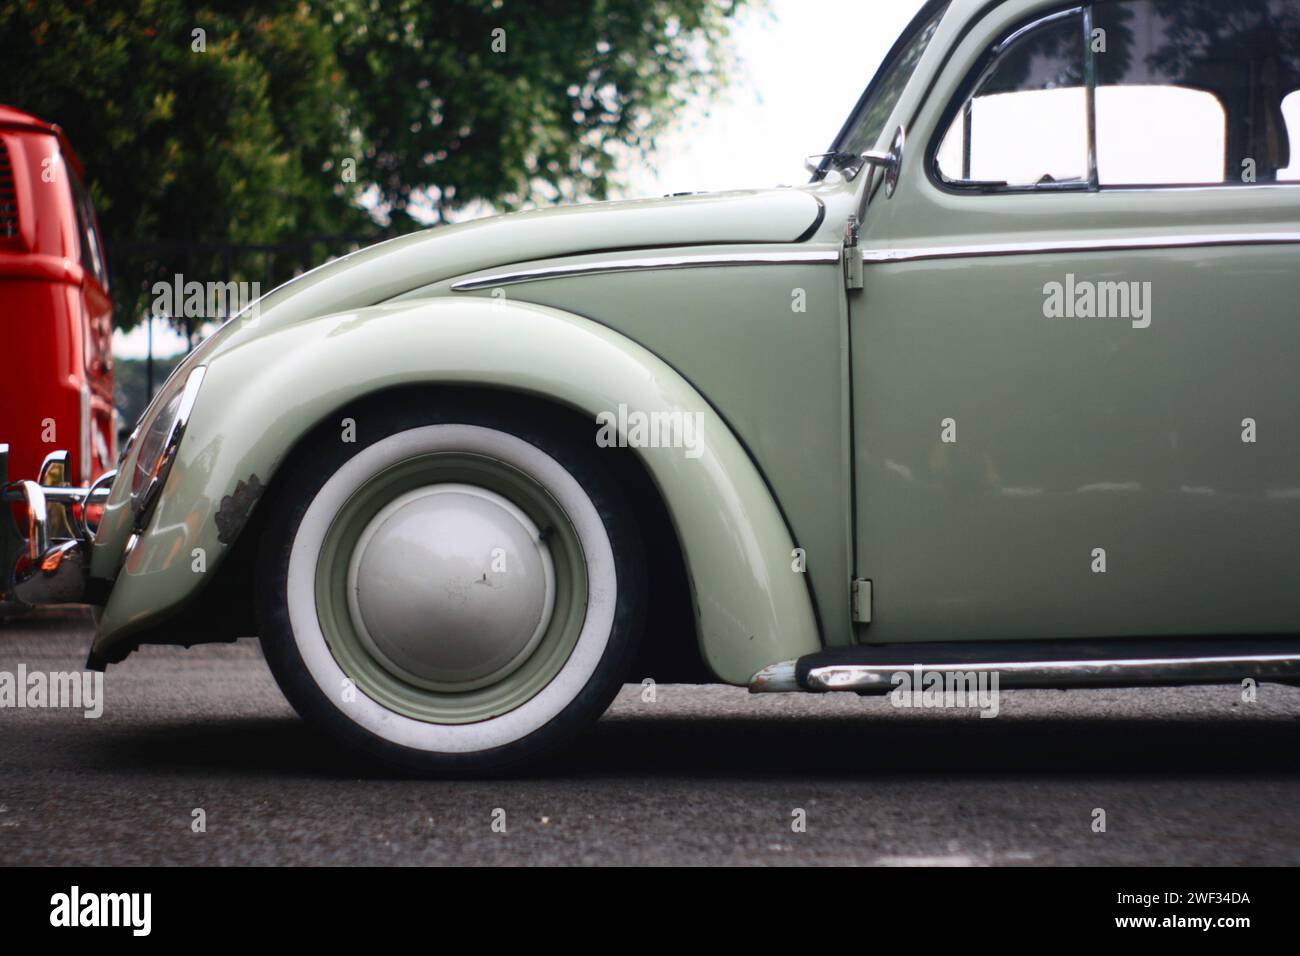 Volkswagen beetle parked in annual VW Indonesia Jambore gathering in Malang, East Java, Indonesia Stock Photo